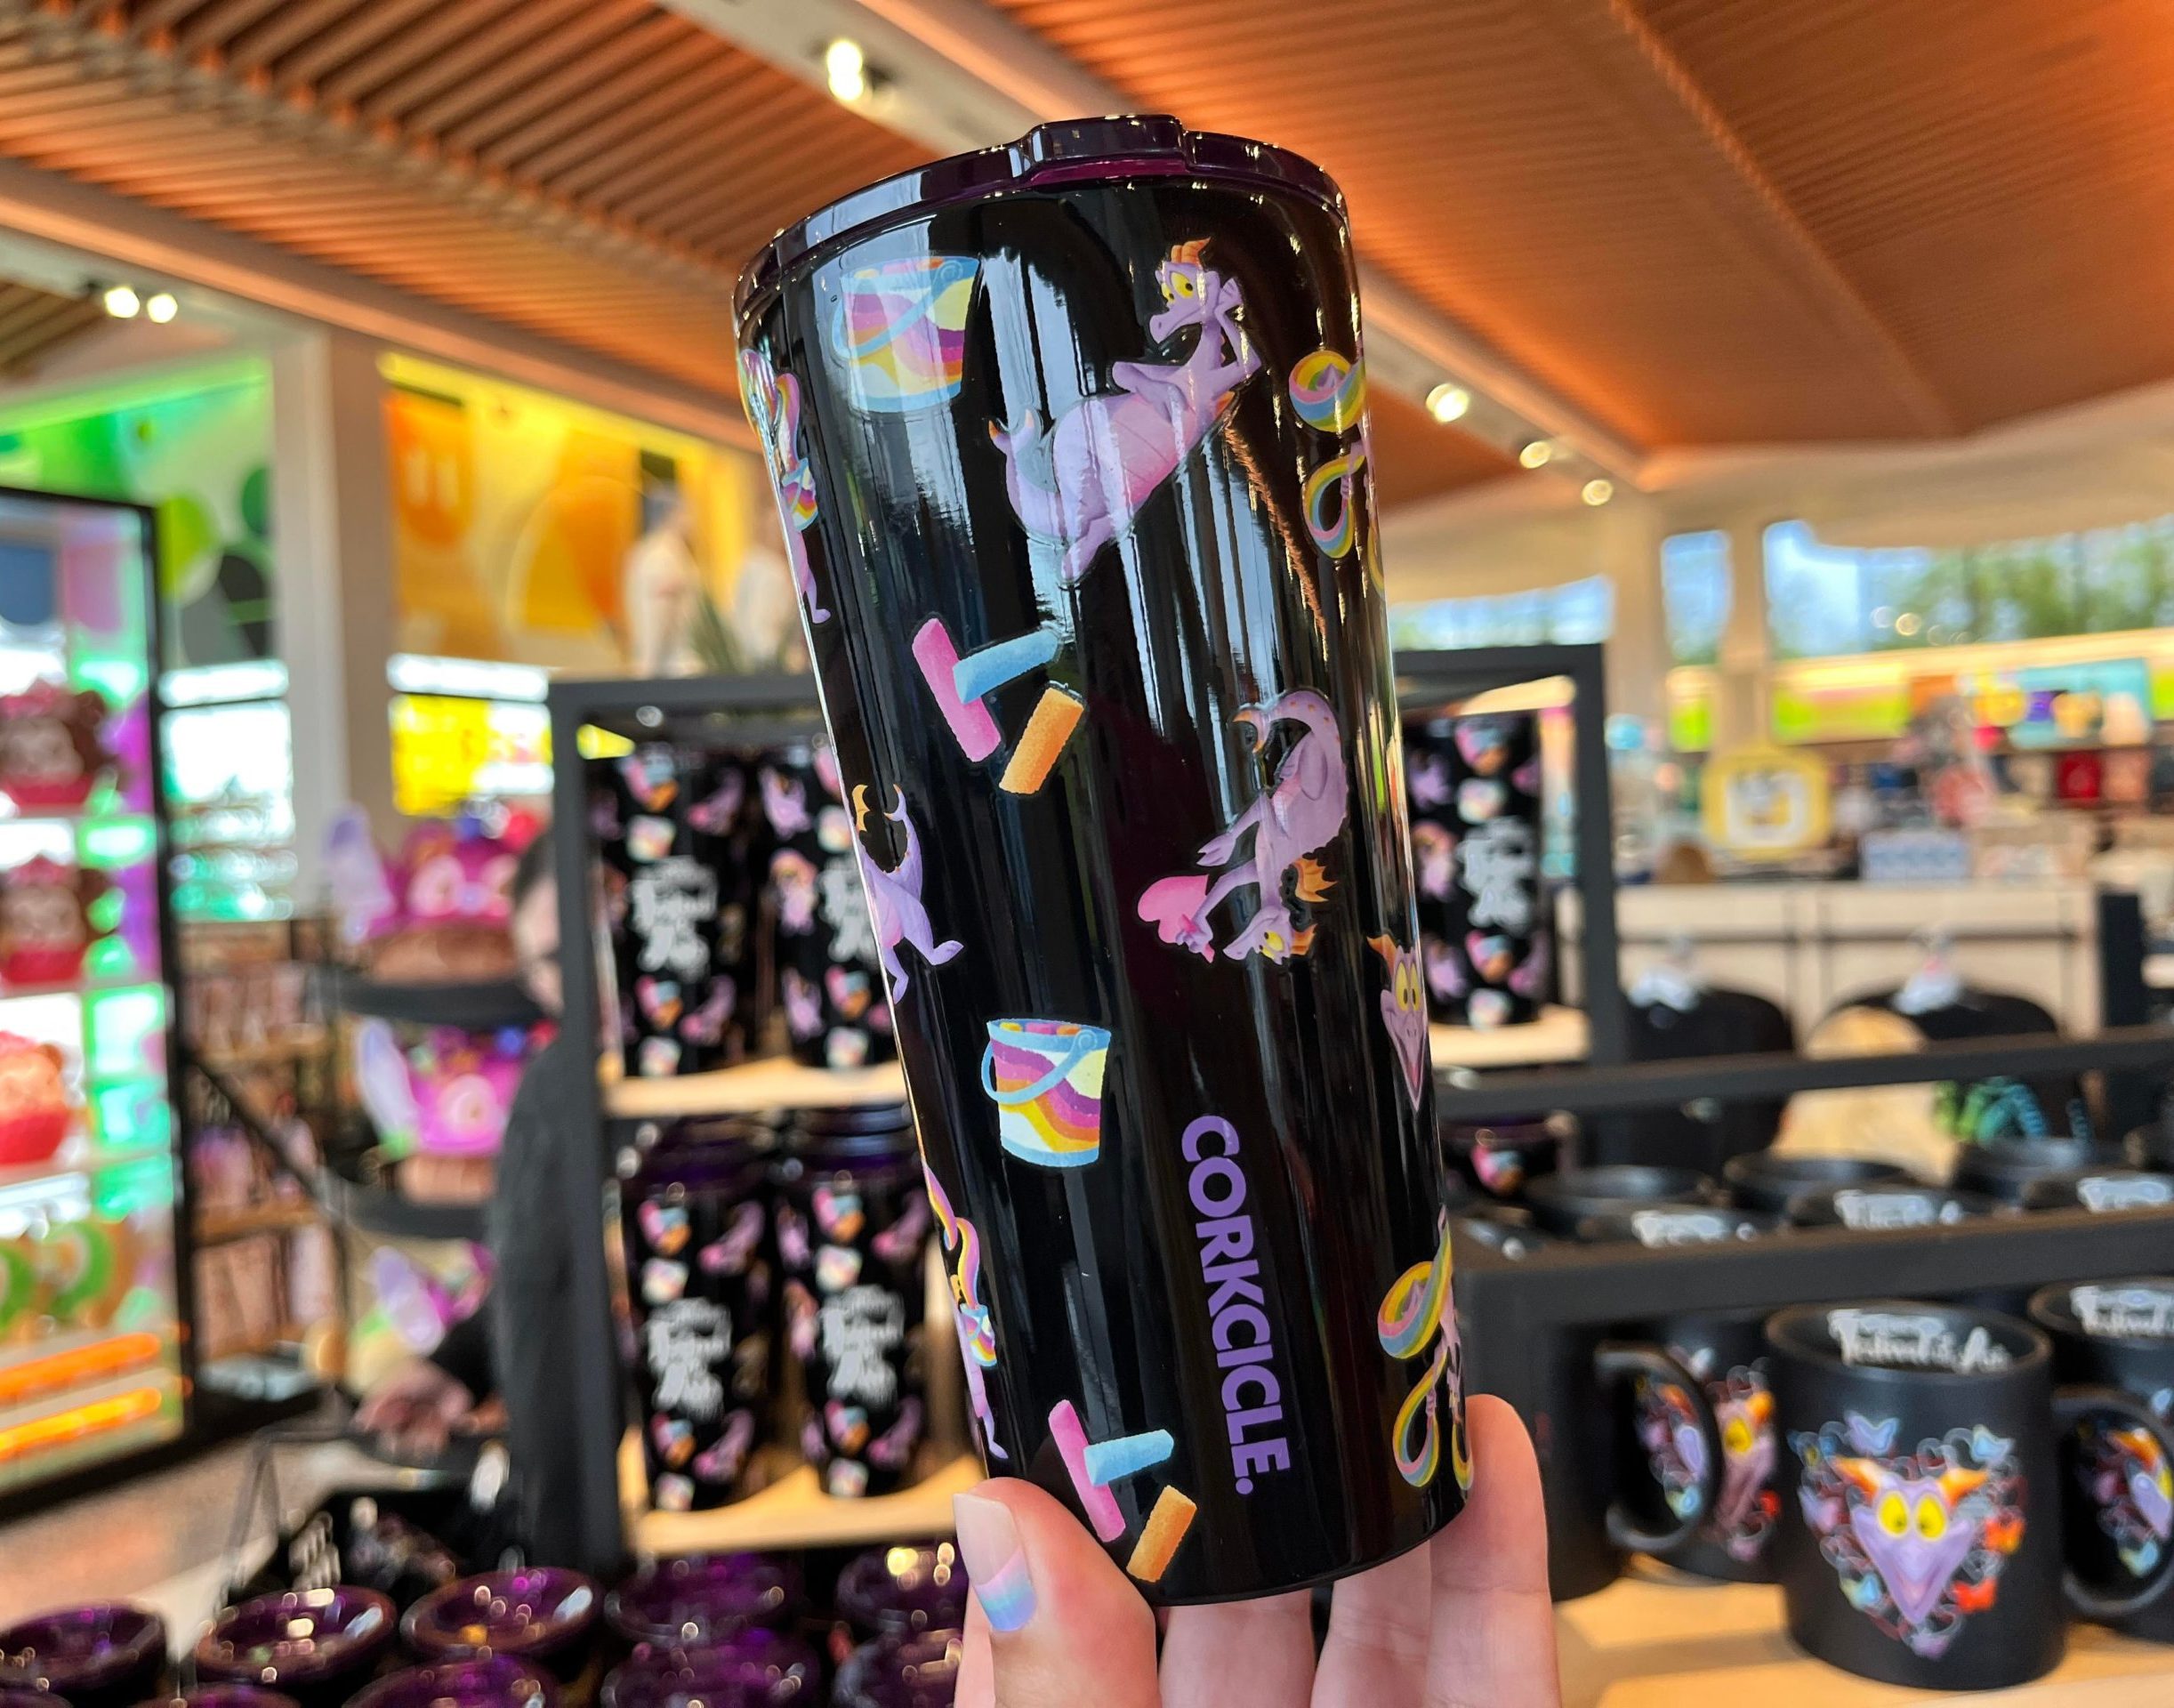 New Corkcicle Store Opens in Disney Springs (Plus a Giveaway!)